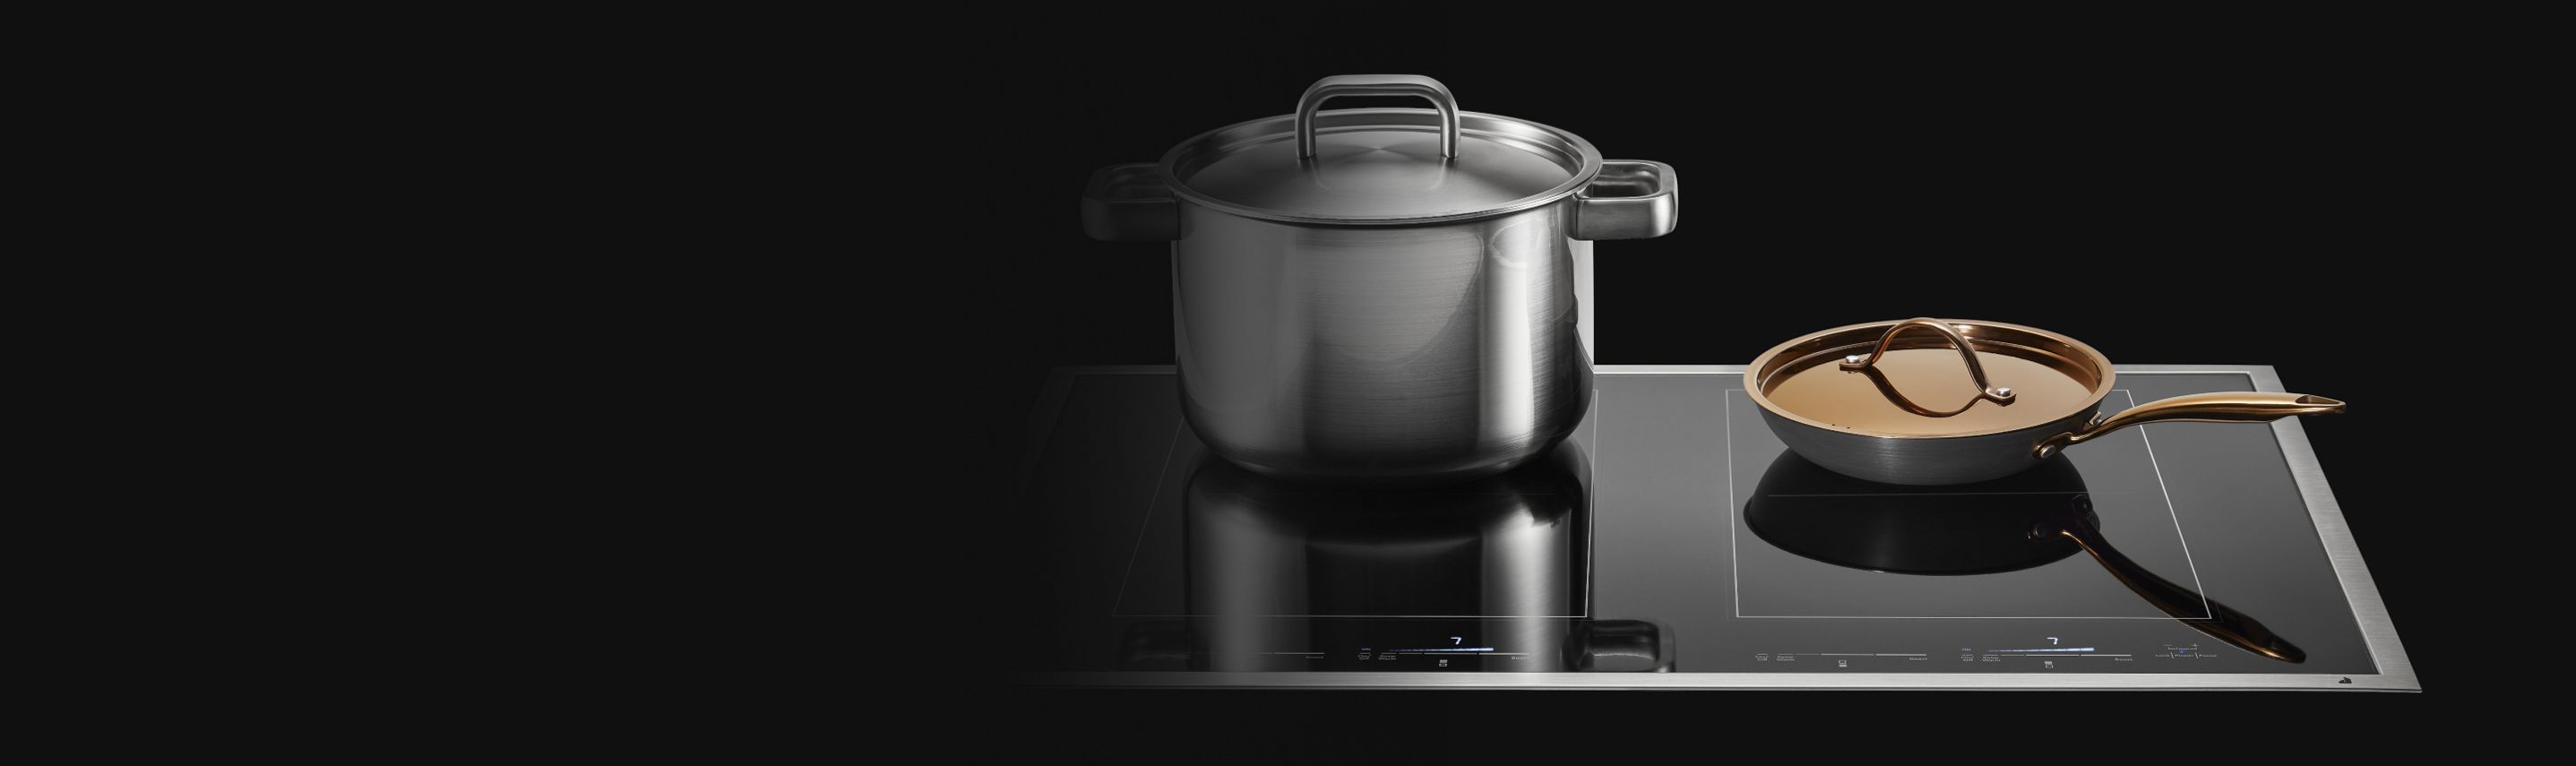 A stockpot and copper pan on a JennAir Induction Cooktop. 